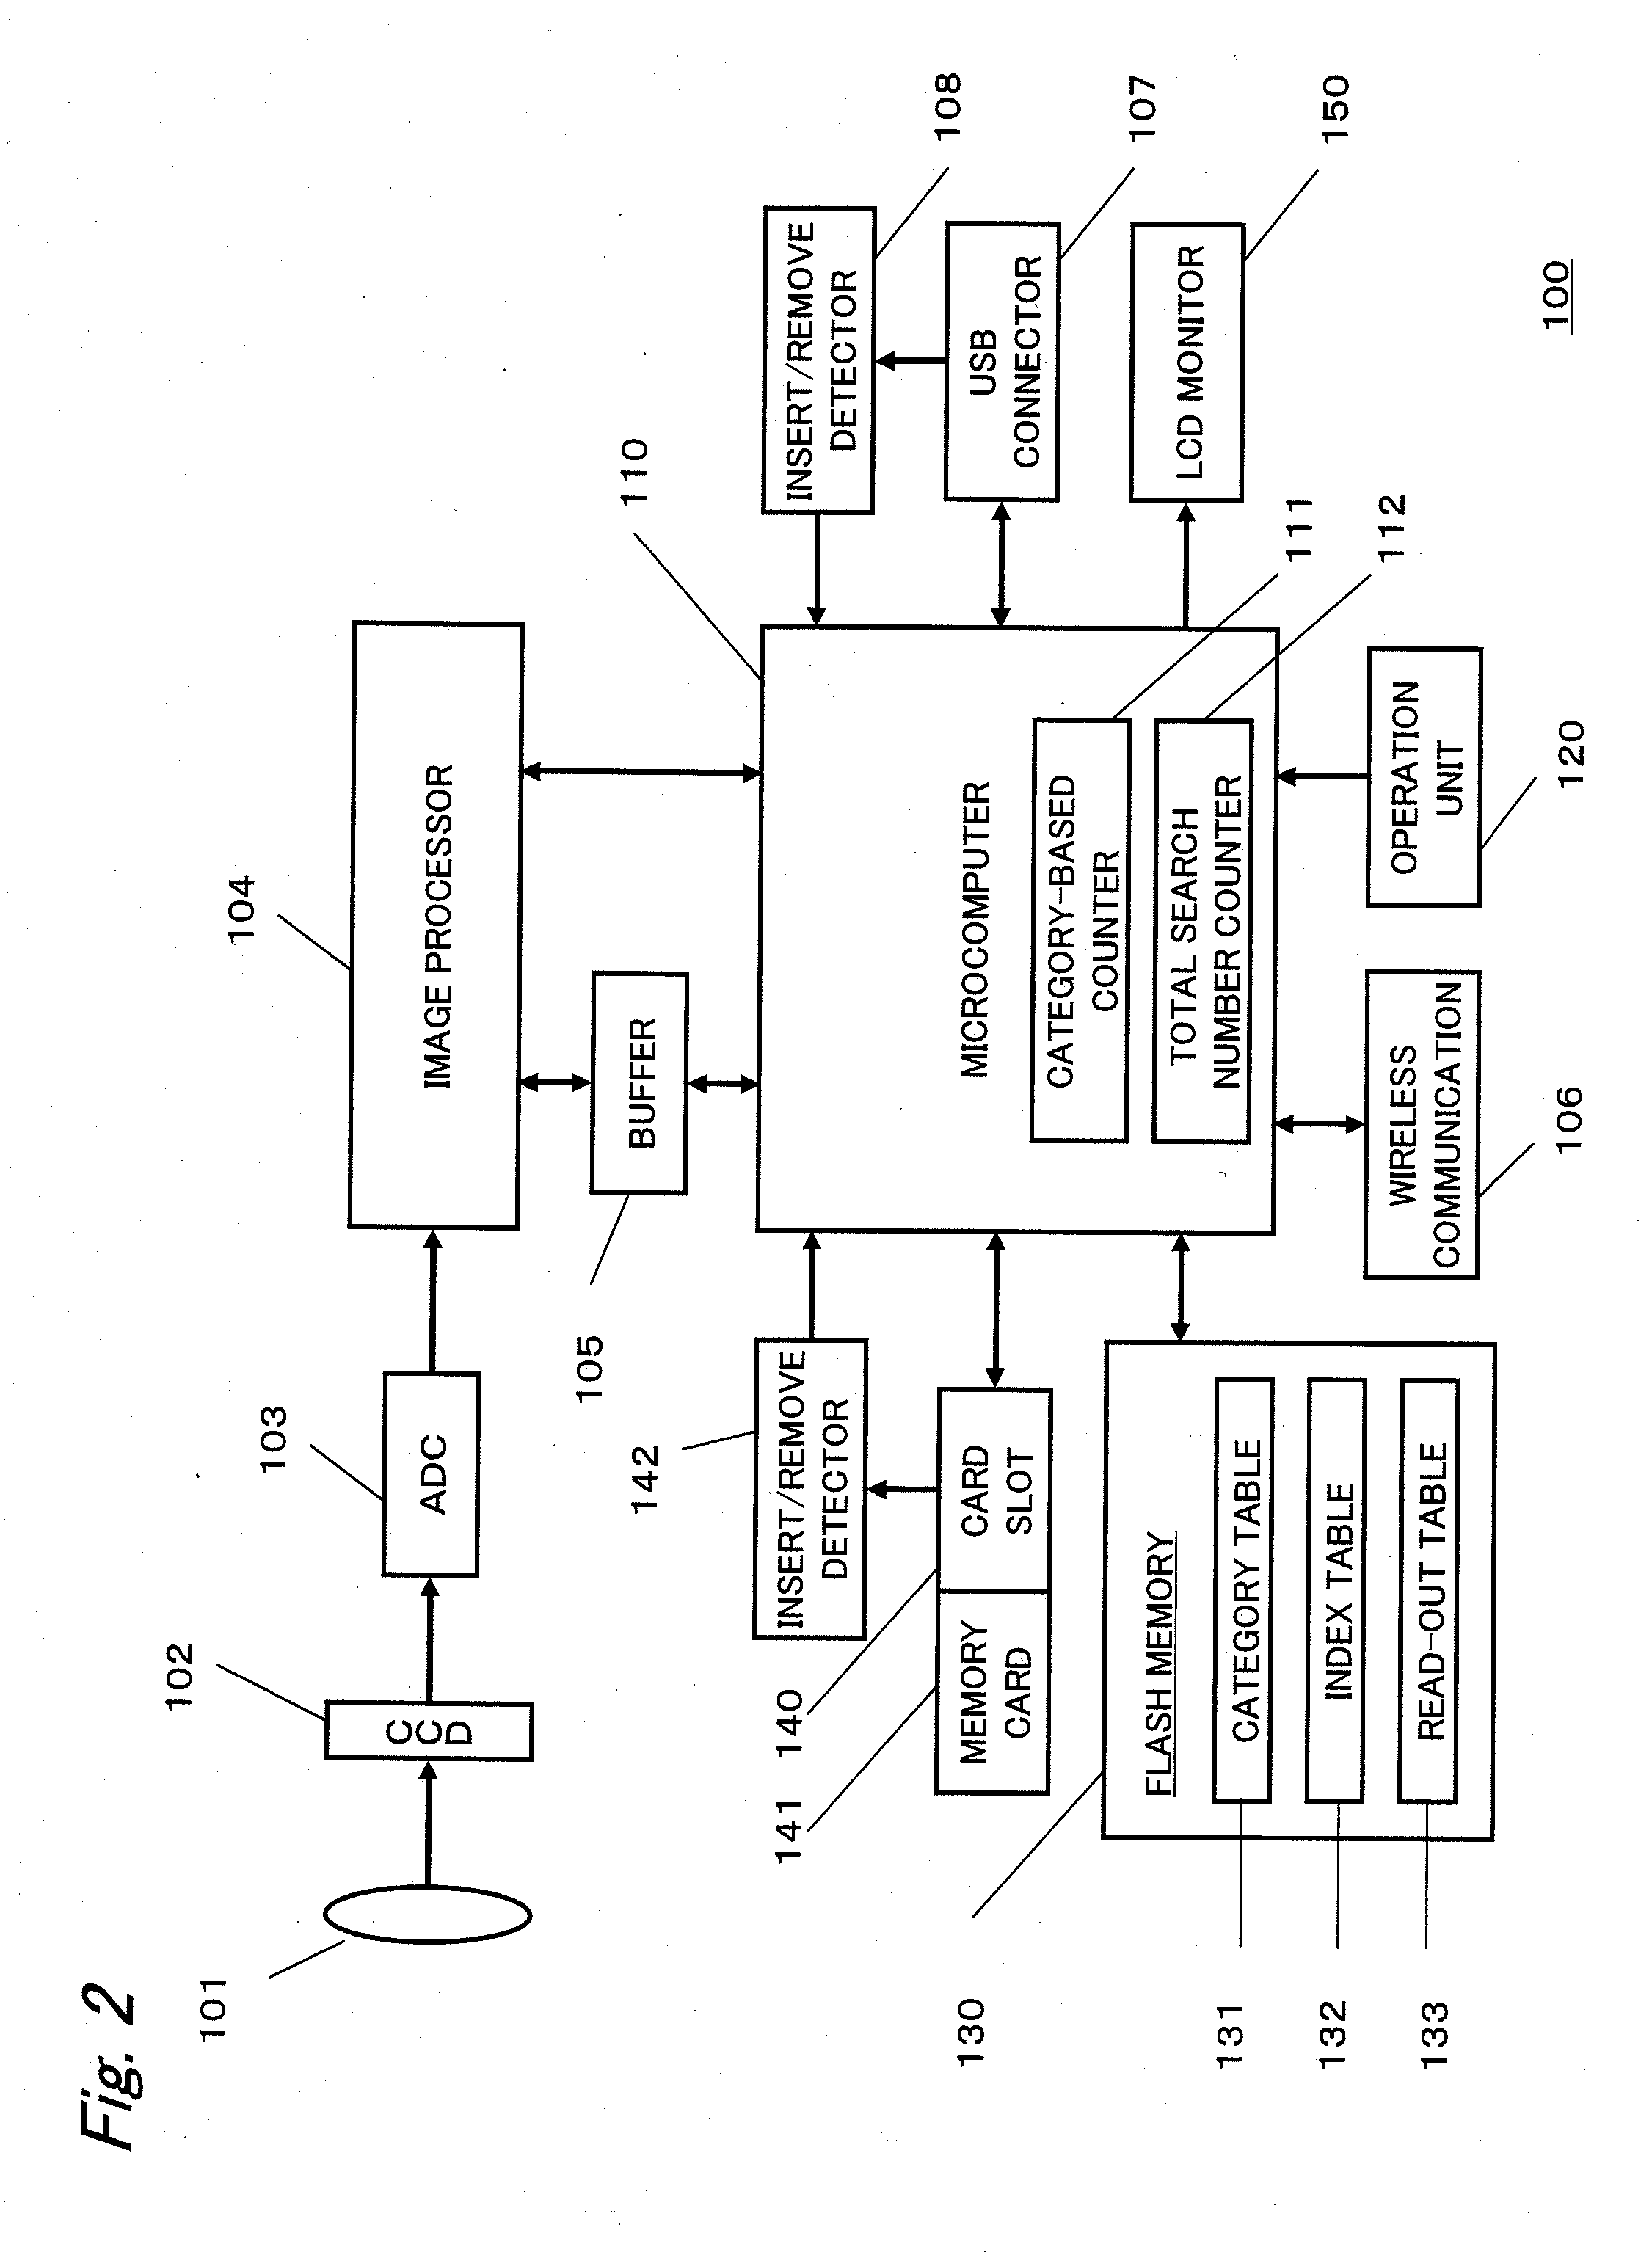 Imaging apparatus and image searching method